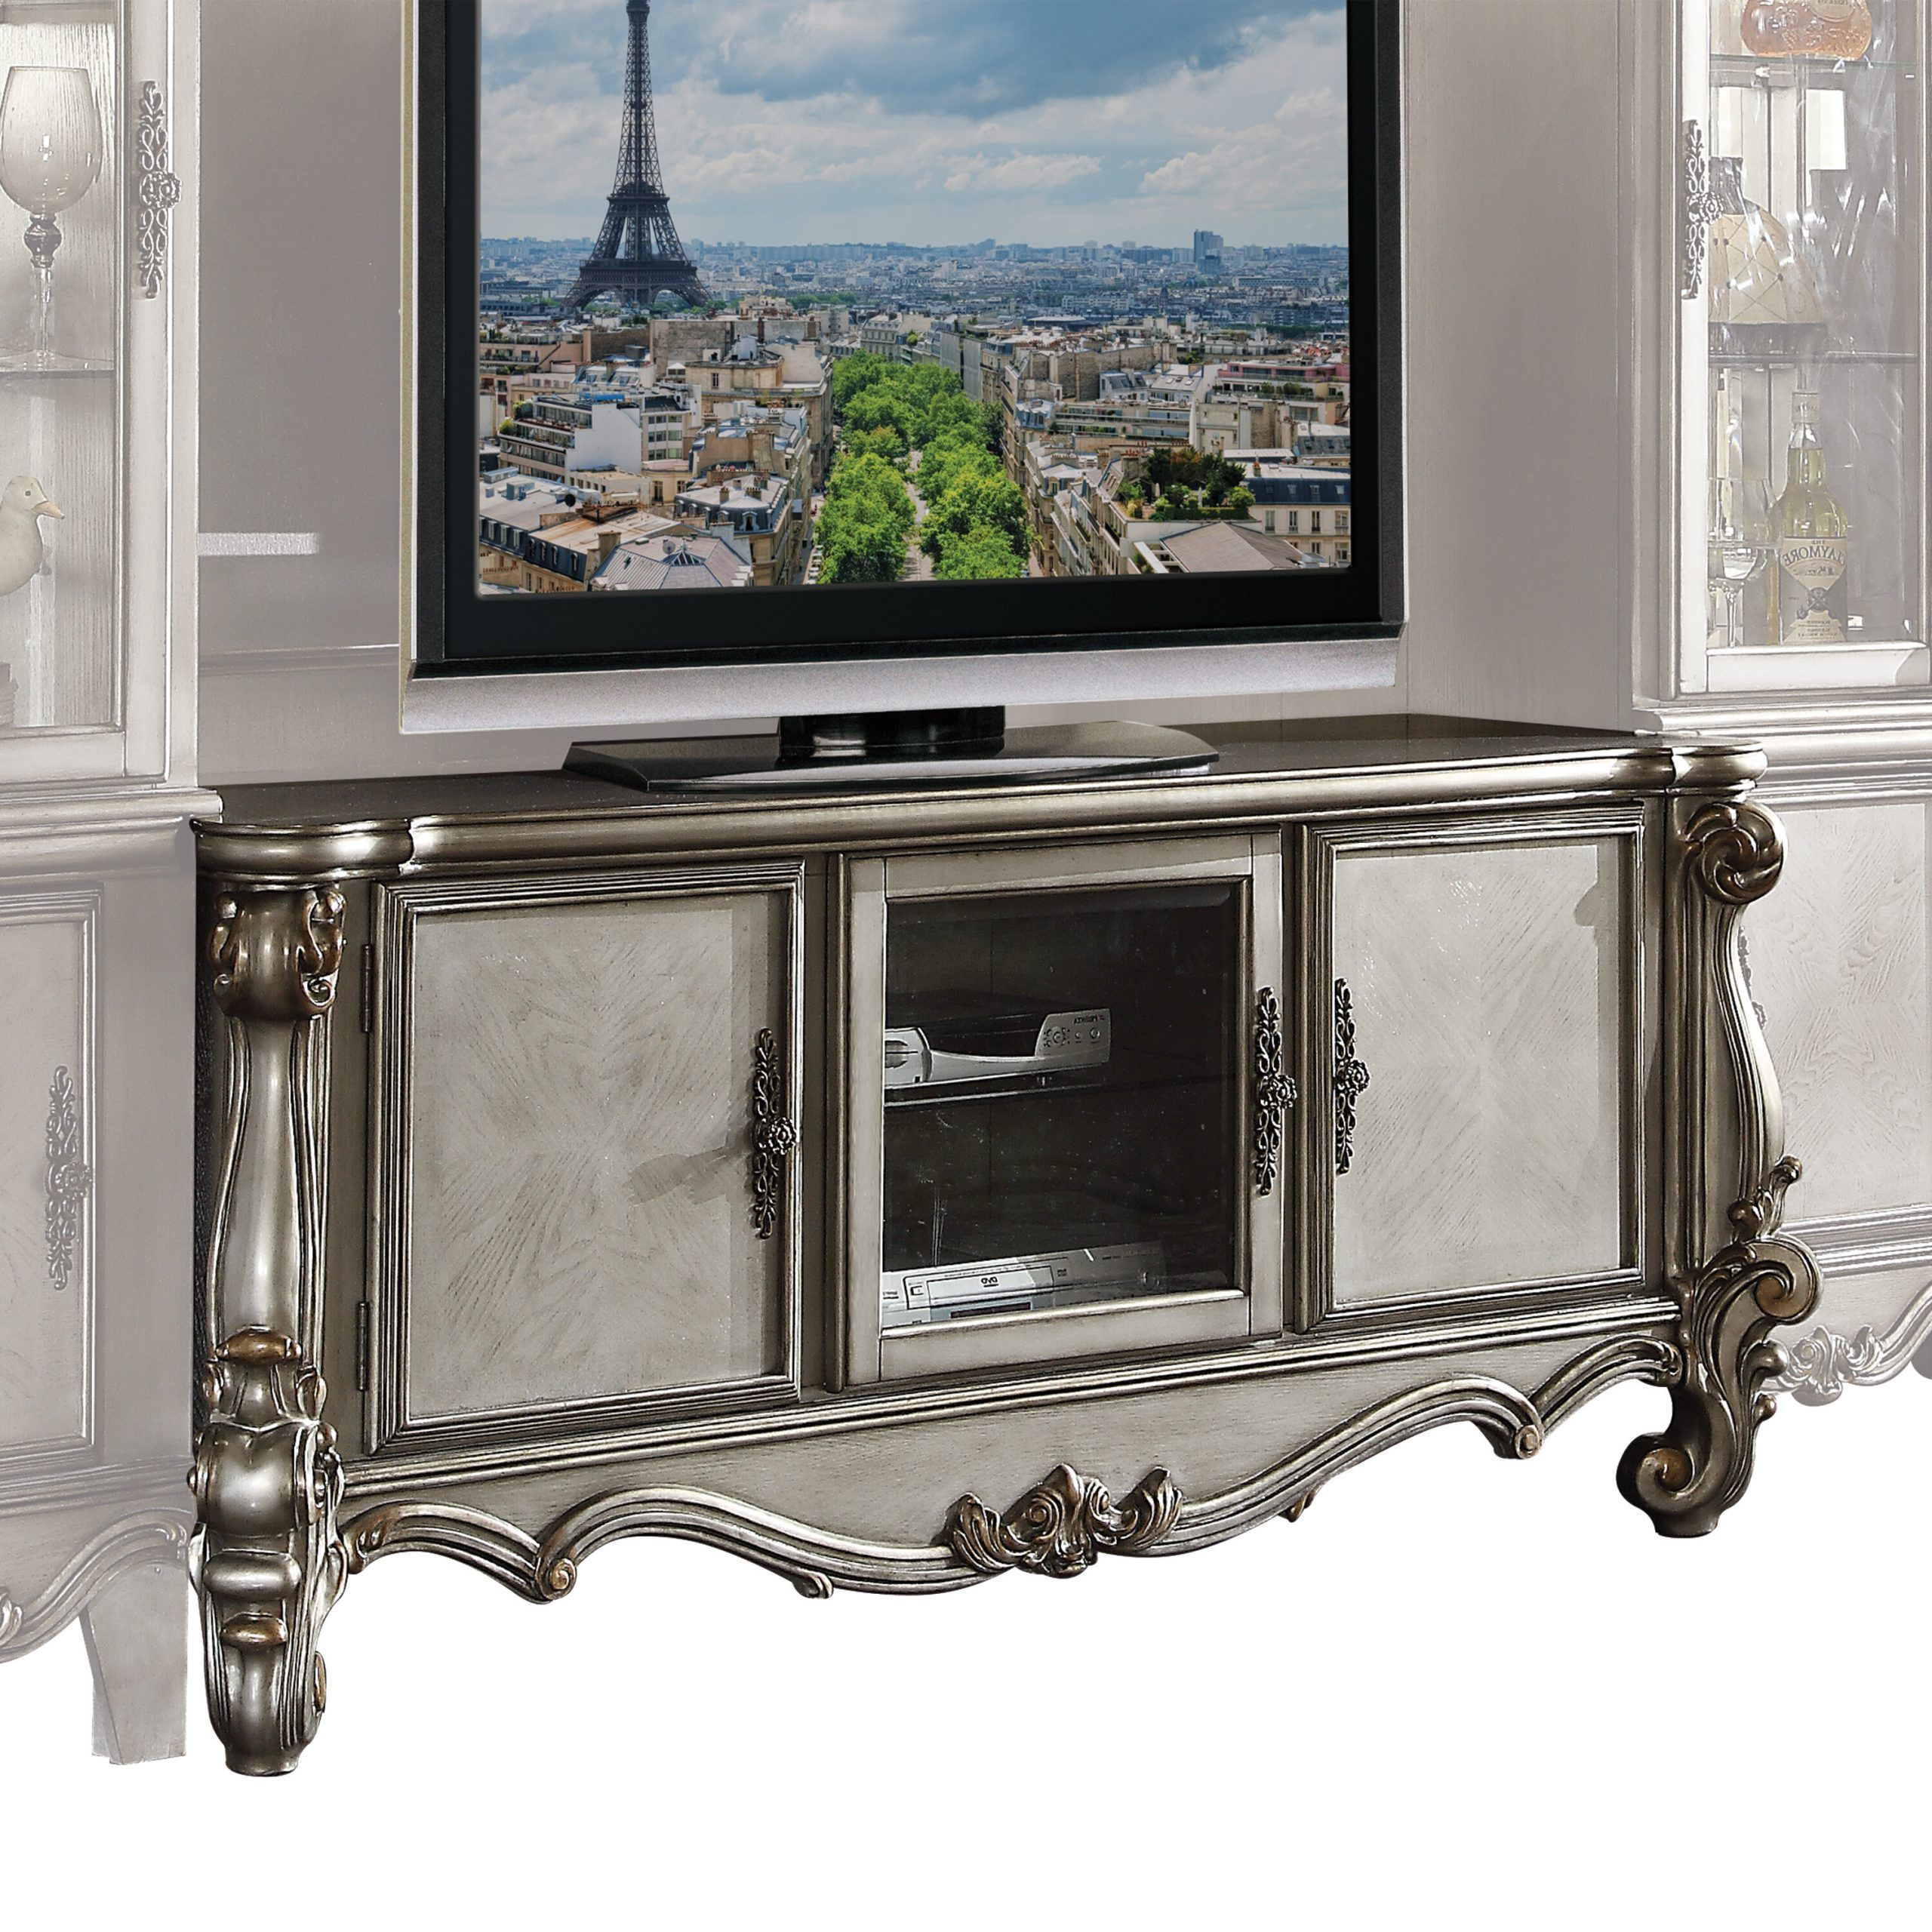 Colourtree Versailles Media Center | Wayfair Pertaining To Versailles Console Cabinets (View 11 of 16)